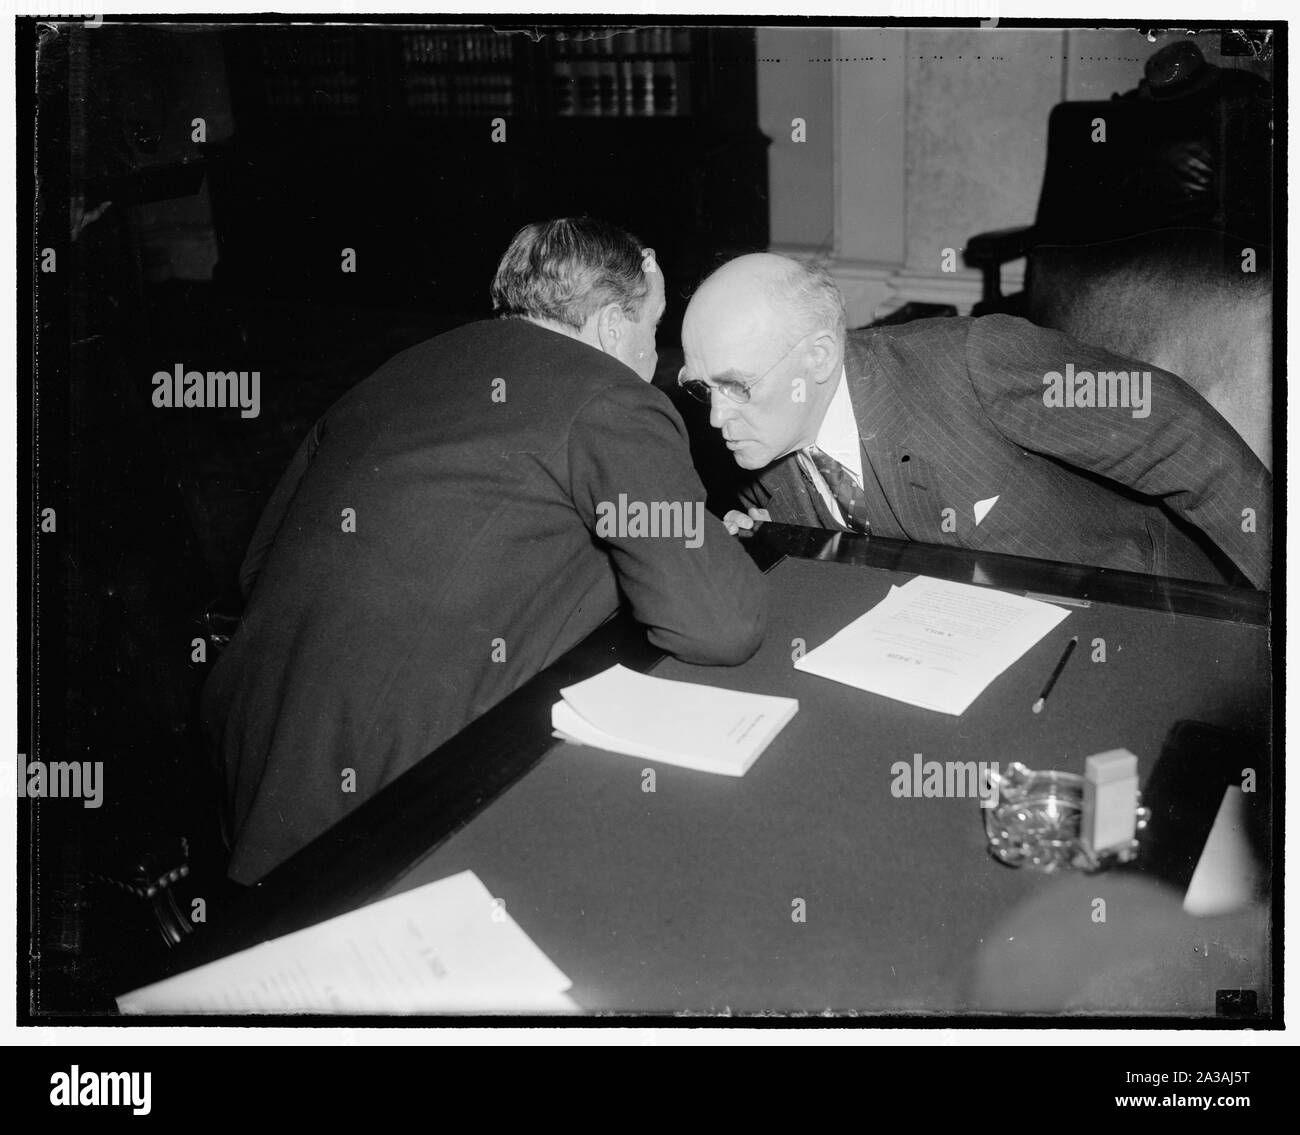 Senatorial huddle. Washington, D.C., Feb. 24. Like Moslems in prayer these two Senators, Robert J. Bulkley of Ohio, and John H. Bankhead, of Alabama, huddled during a lull at Senate Banking and Currency Subcommittee on the Bulkley Bill providing for $6,000,000,000 system of superhighways in the U.S., financed by tolls, 2/24/38 Stock Photo